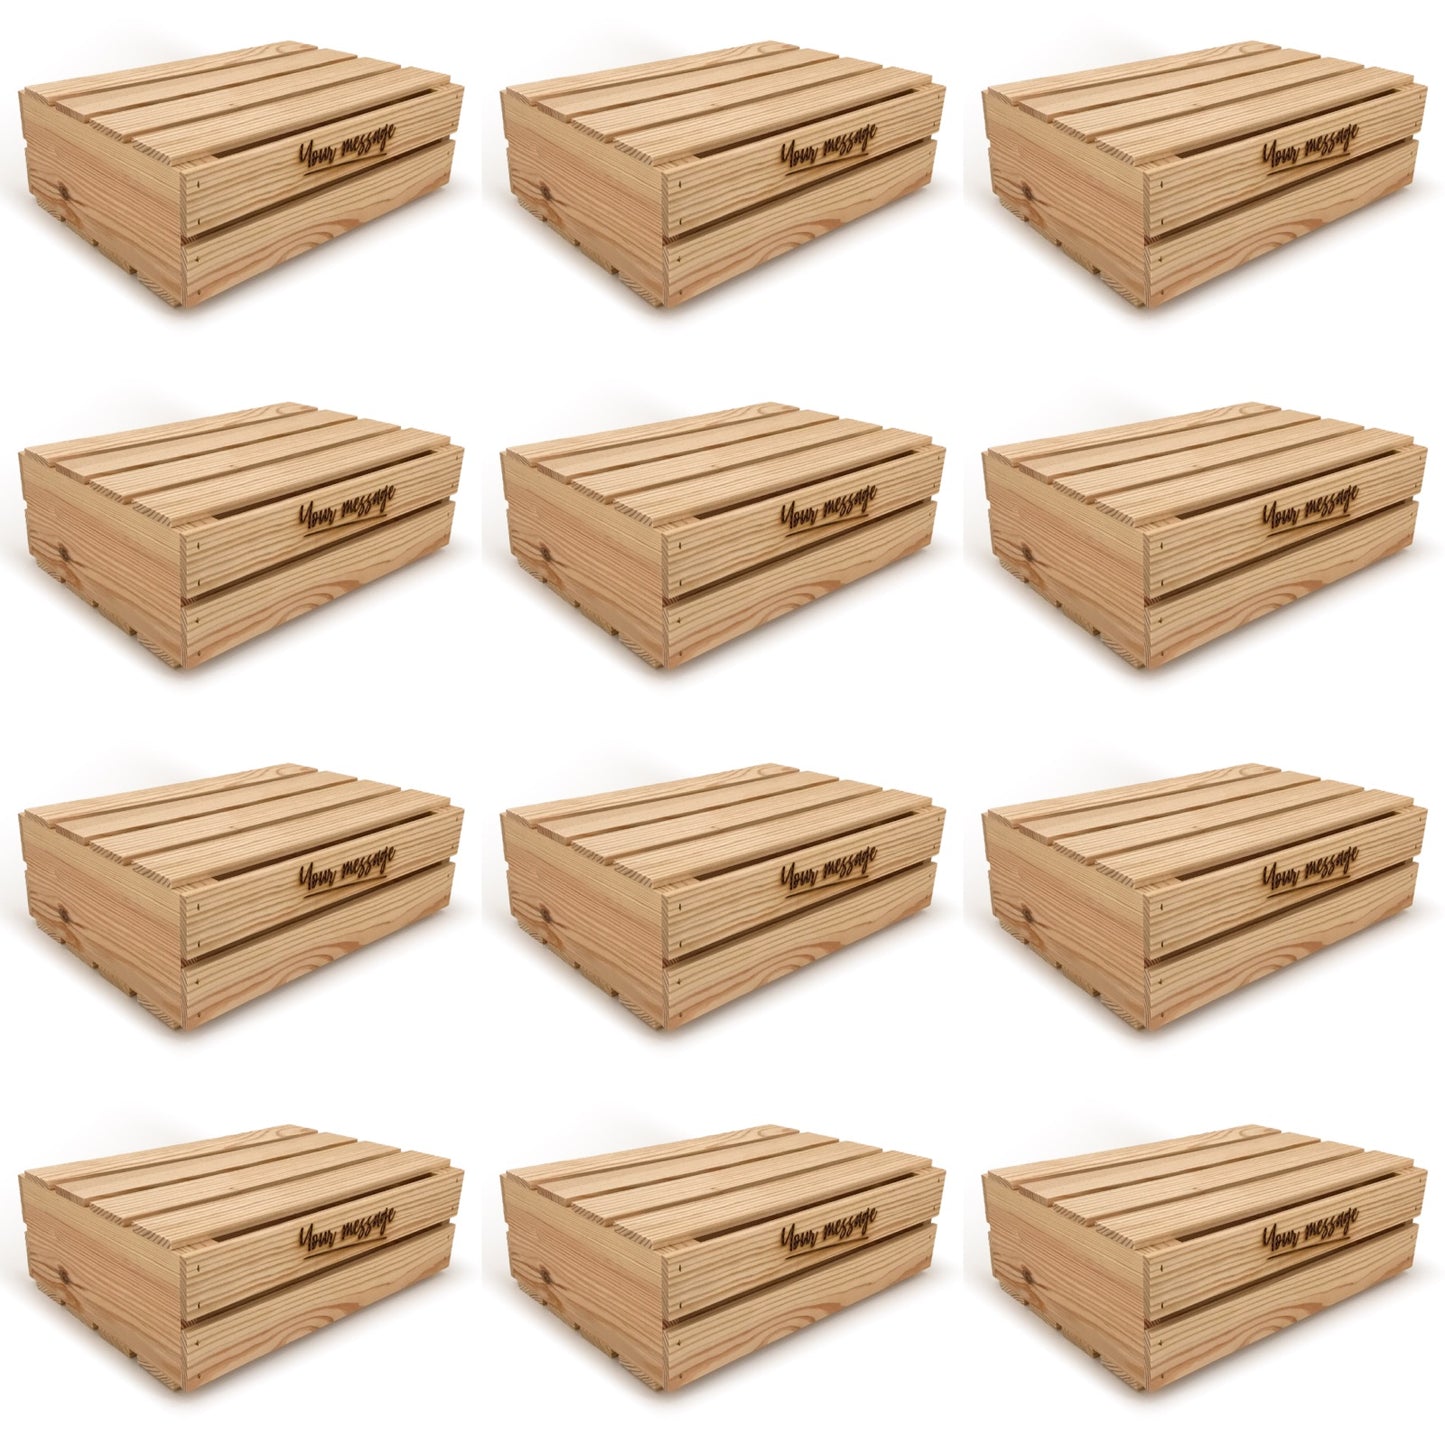 12 Small wooden crates with lid and custom message 16x12x5.25